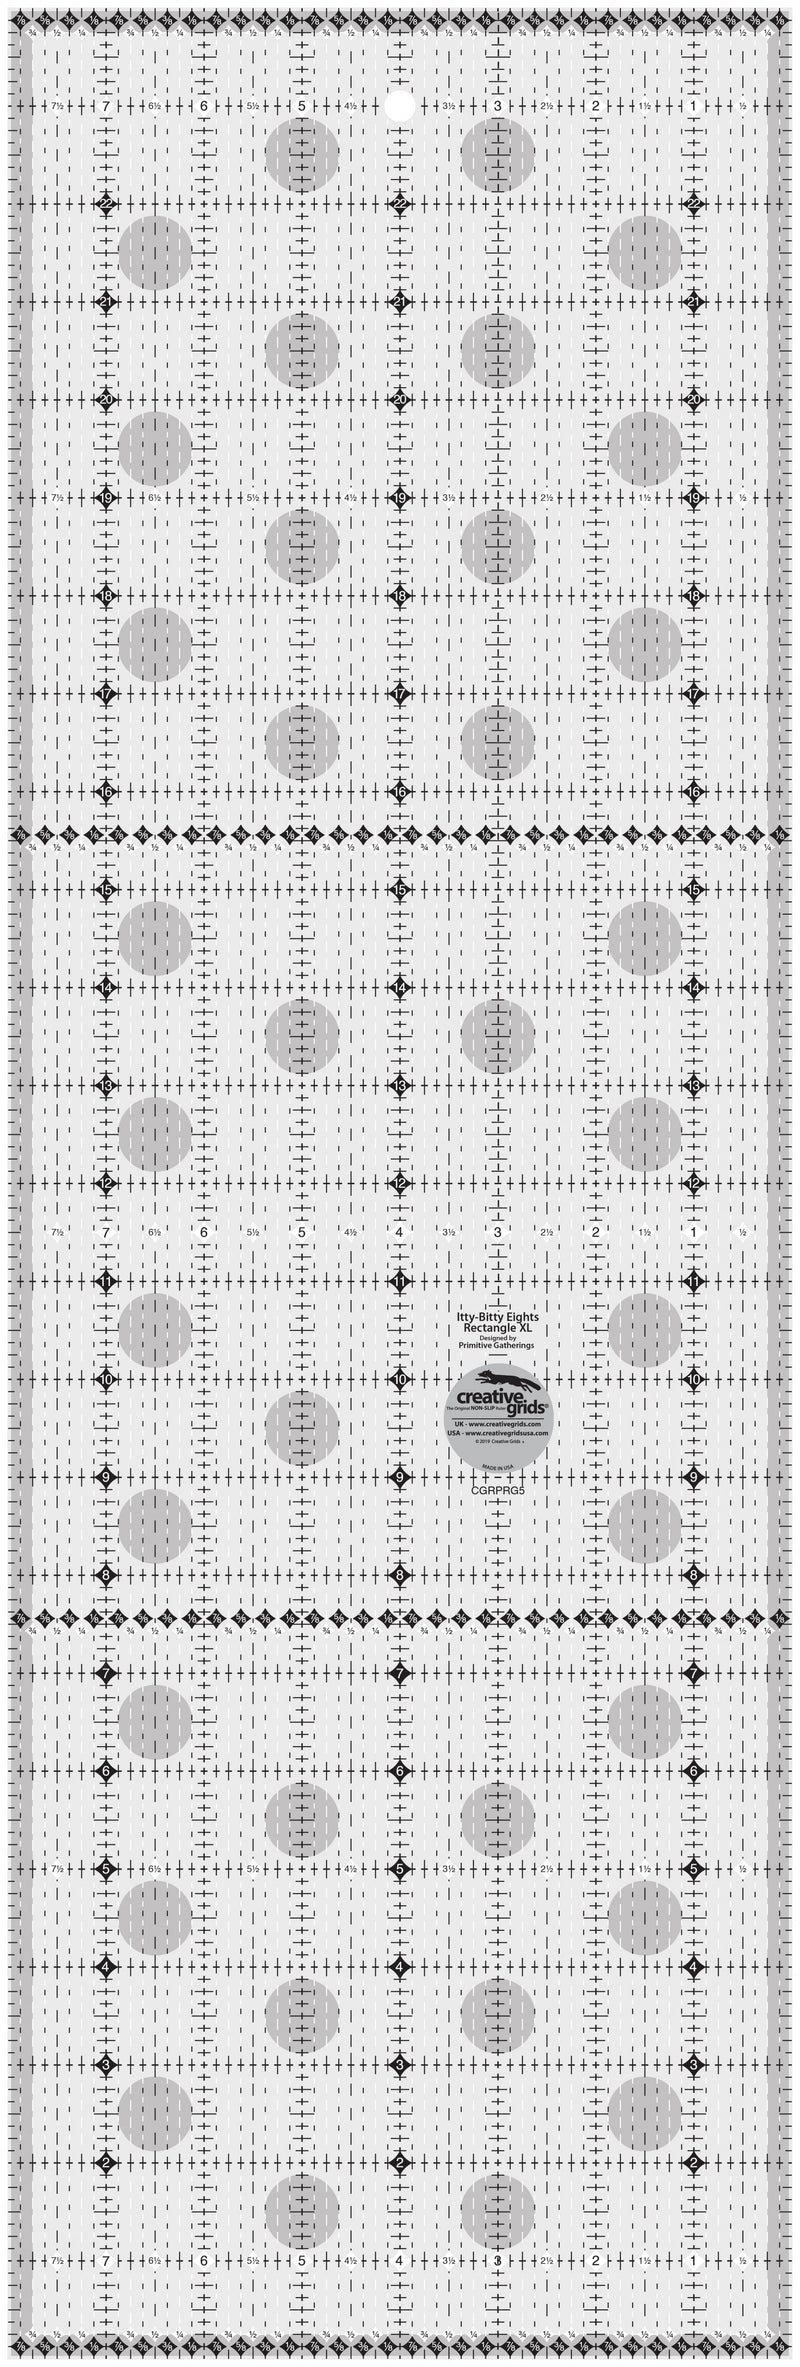 Creative Grids Itty-Bitty Eights Rectangle XL 8in x 24in Quilt Ruler